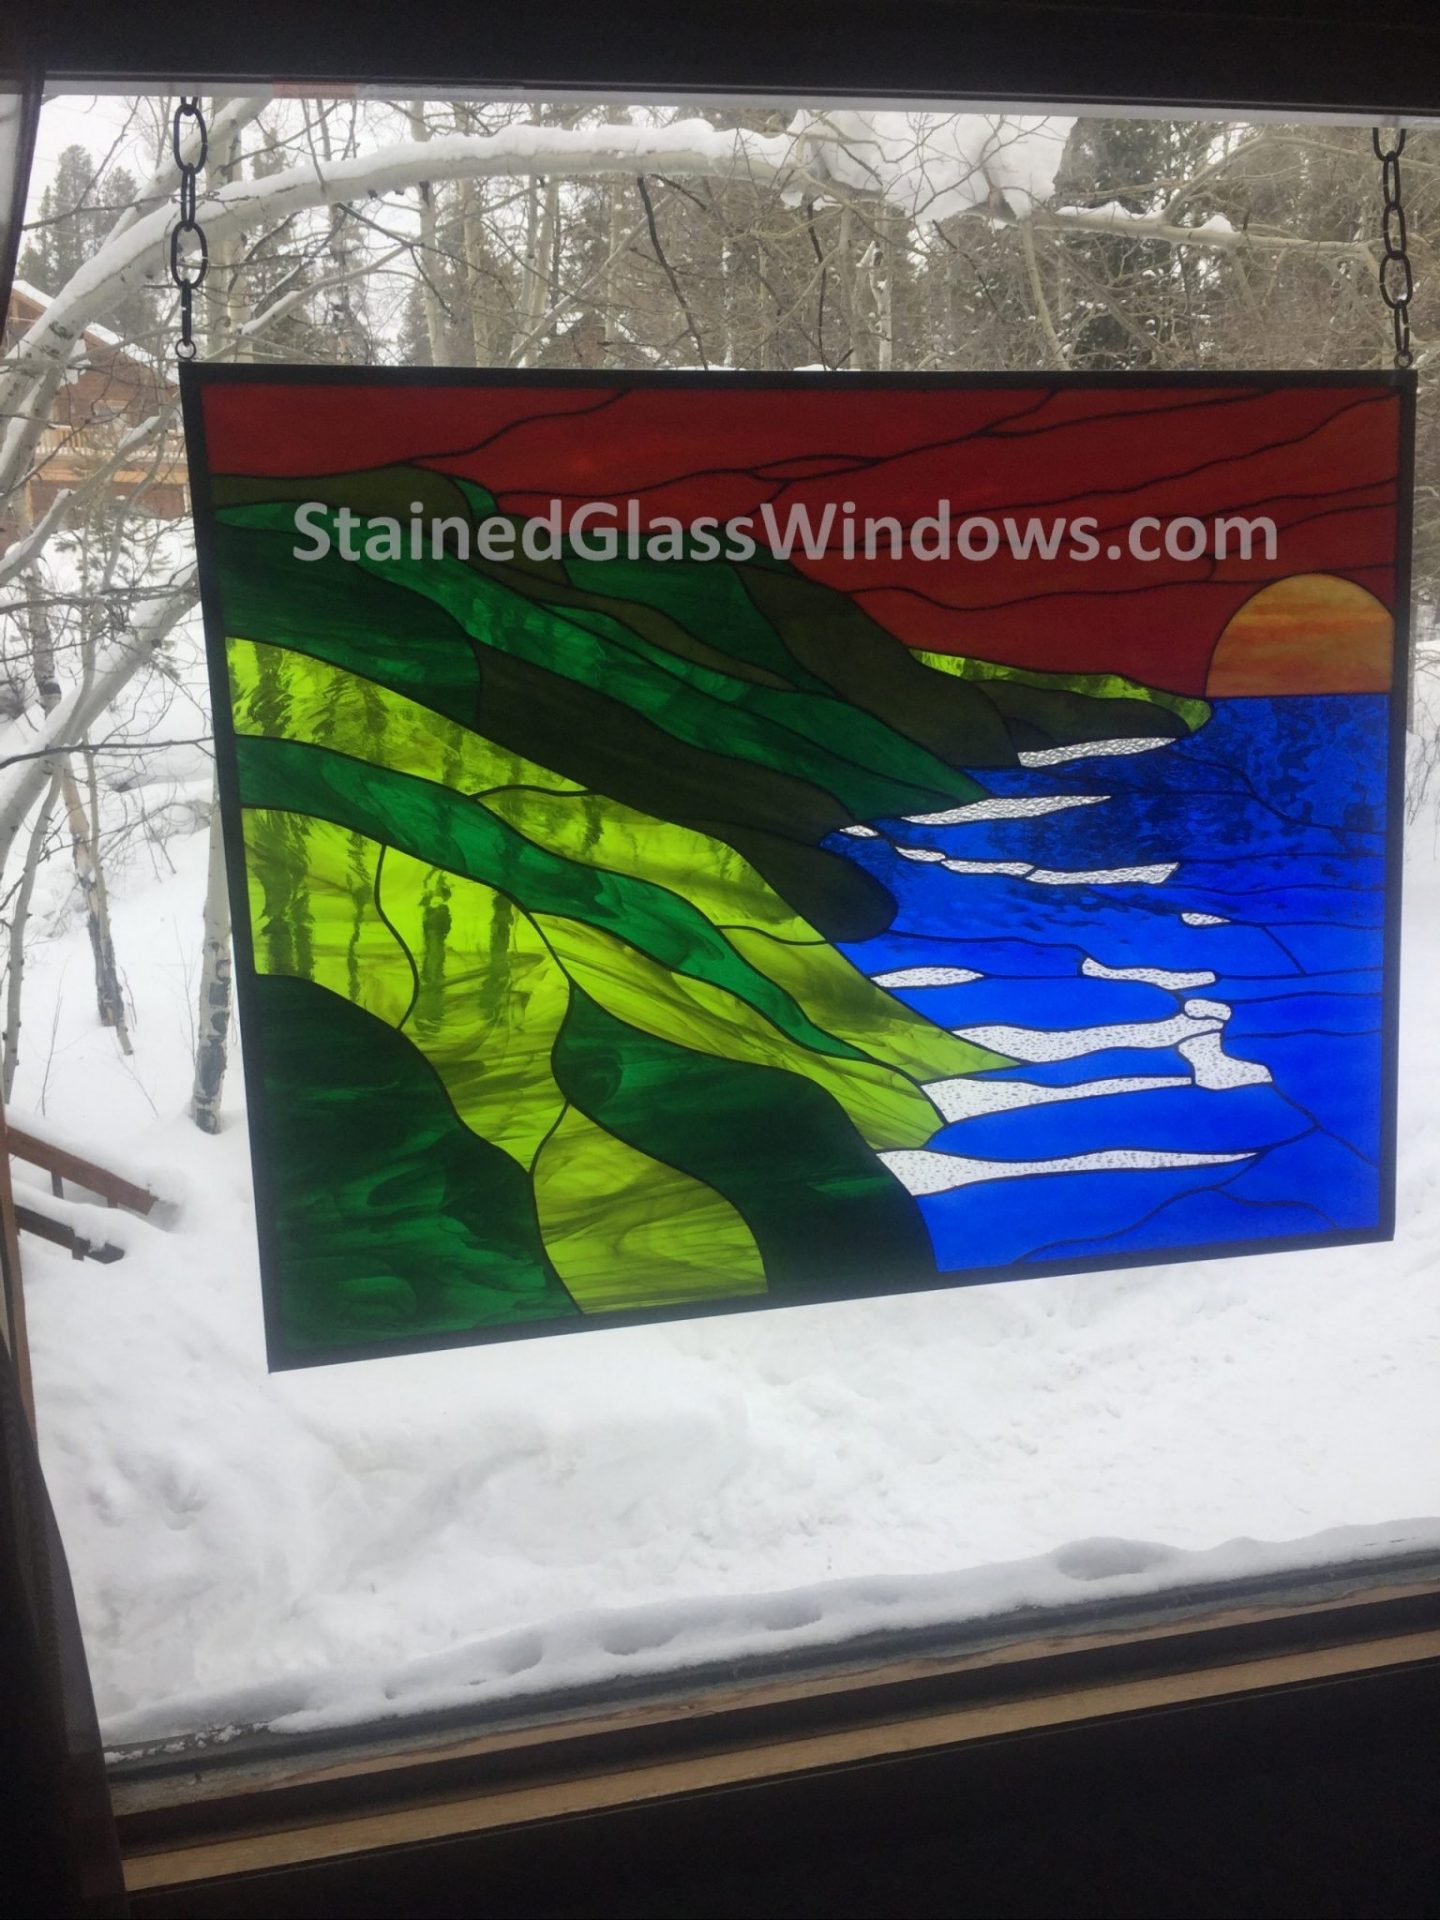 "Fire and ice" Hawaiian Coastline stained glass window hung with chains in snowy Colorado